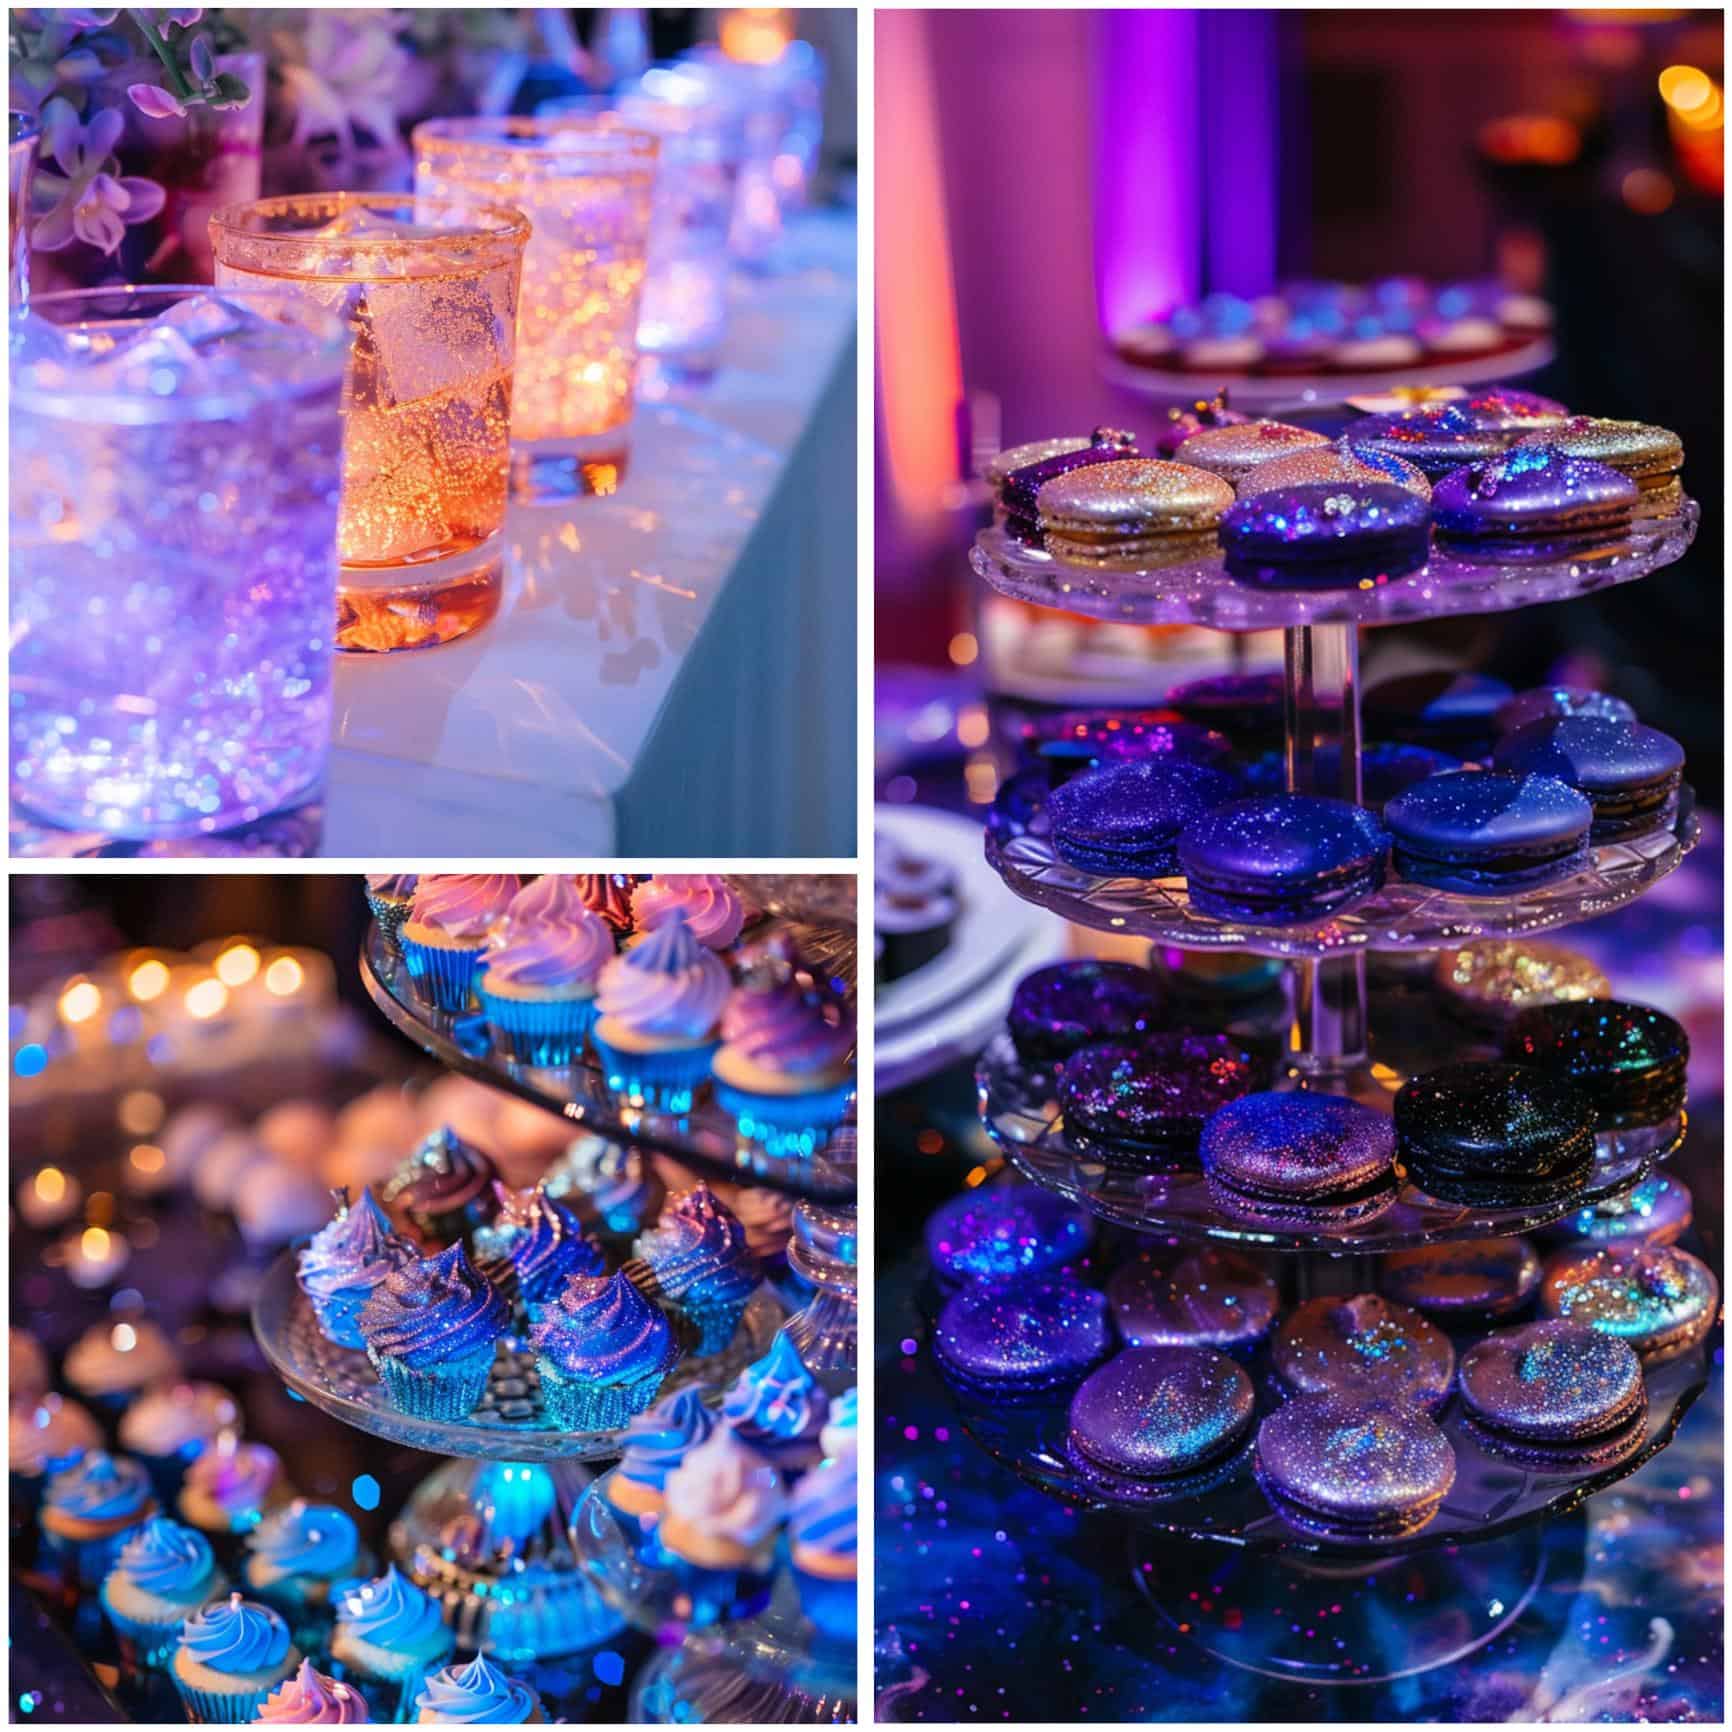 celestial wedding theme ideas for food and drinks